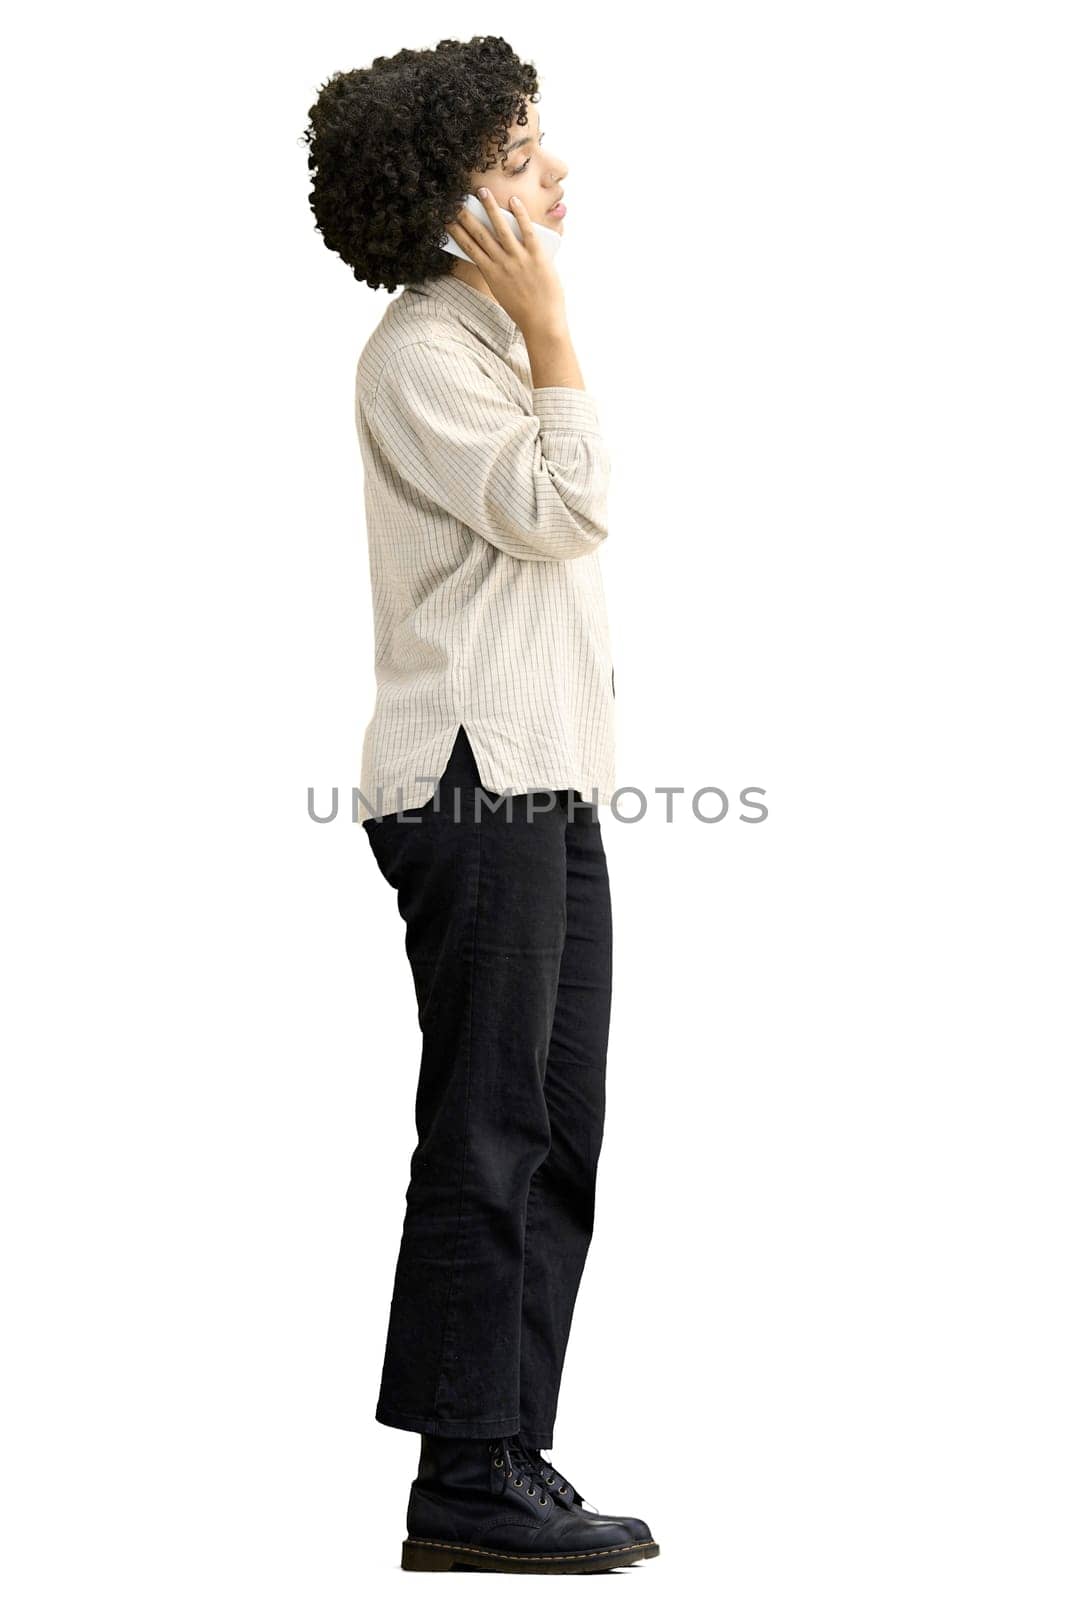 A woman, full-length, on a white background, with a phone.